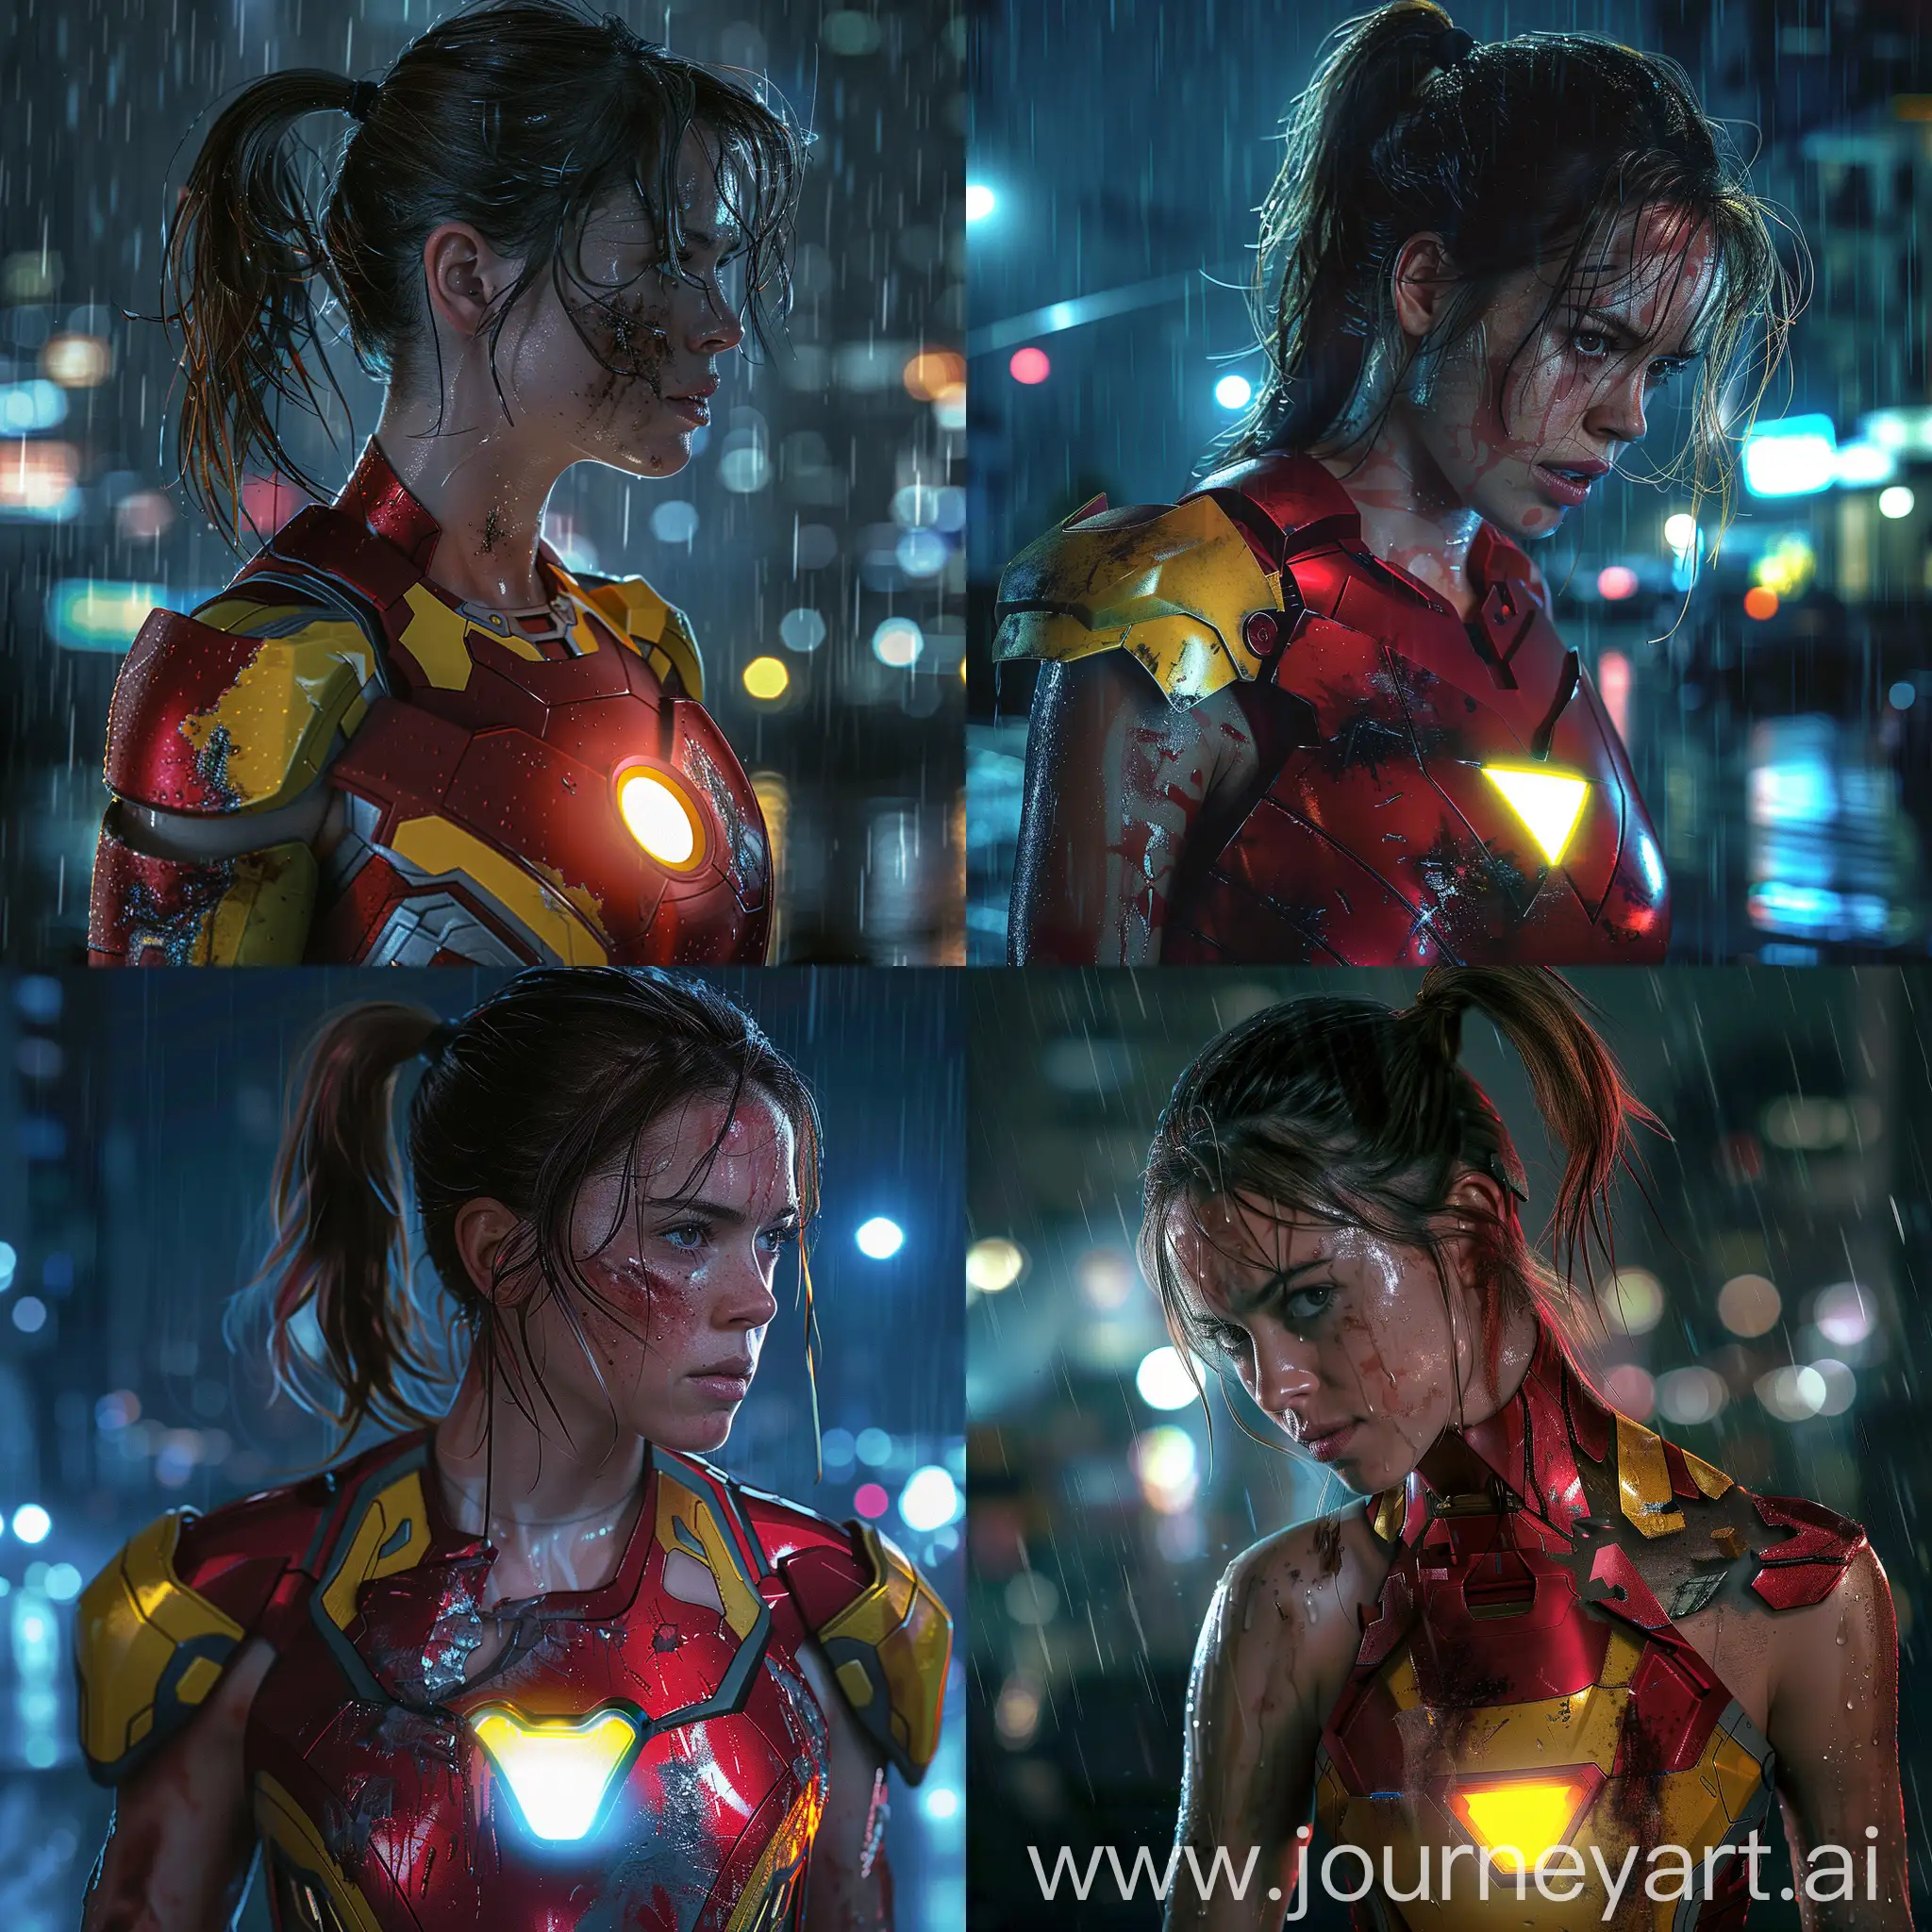 Hyper-Realistic-Image-of-Daisy-Ridley-in-Damaged-Iron-Man-Armor-at-Night